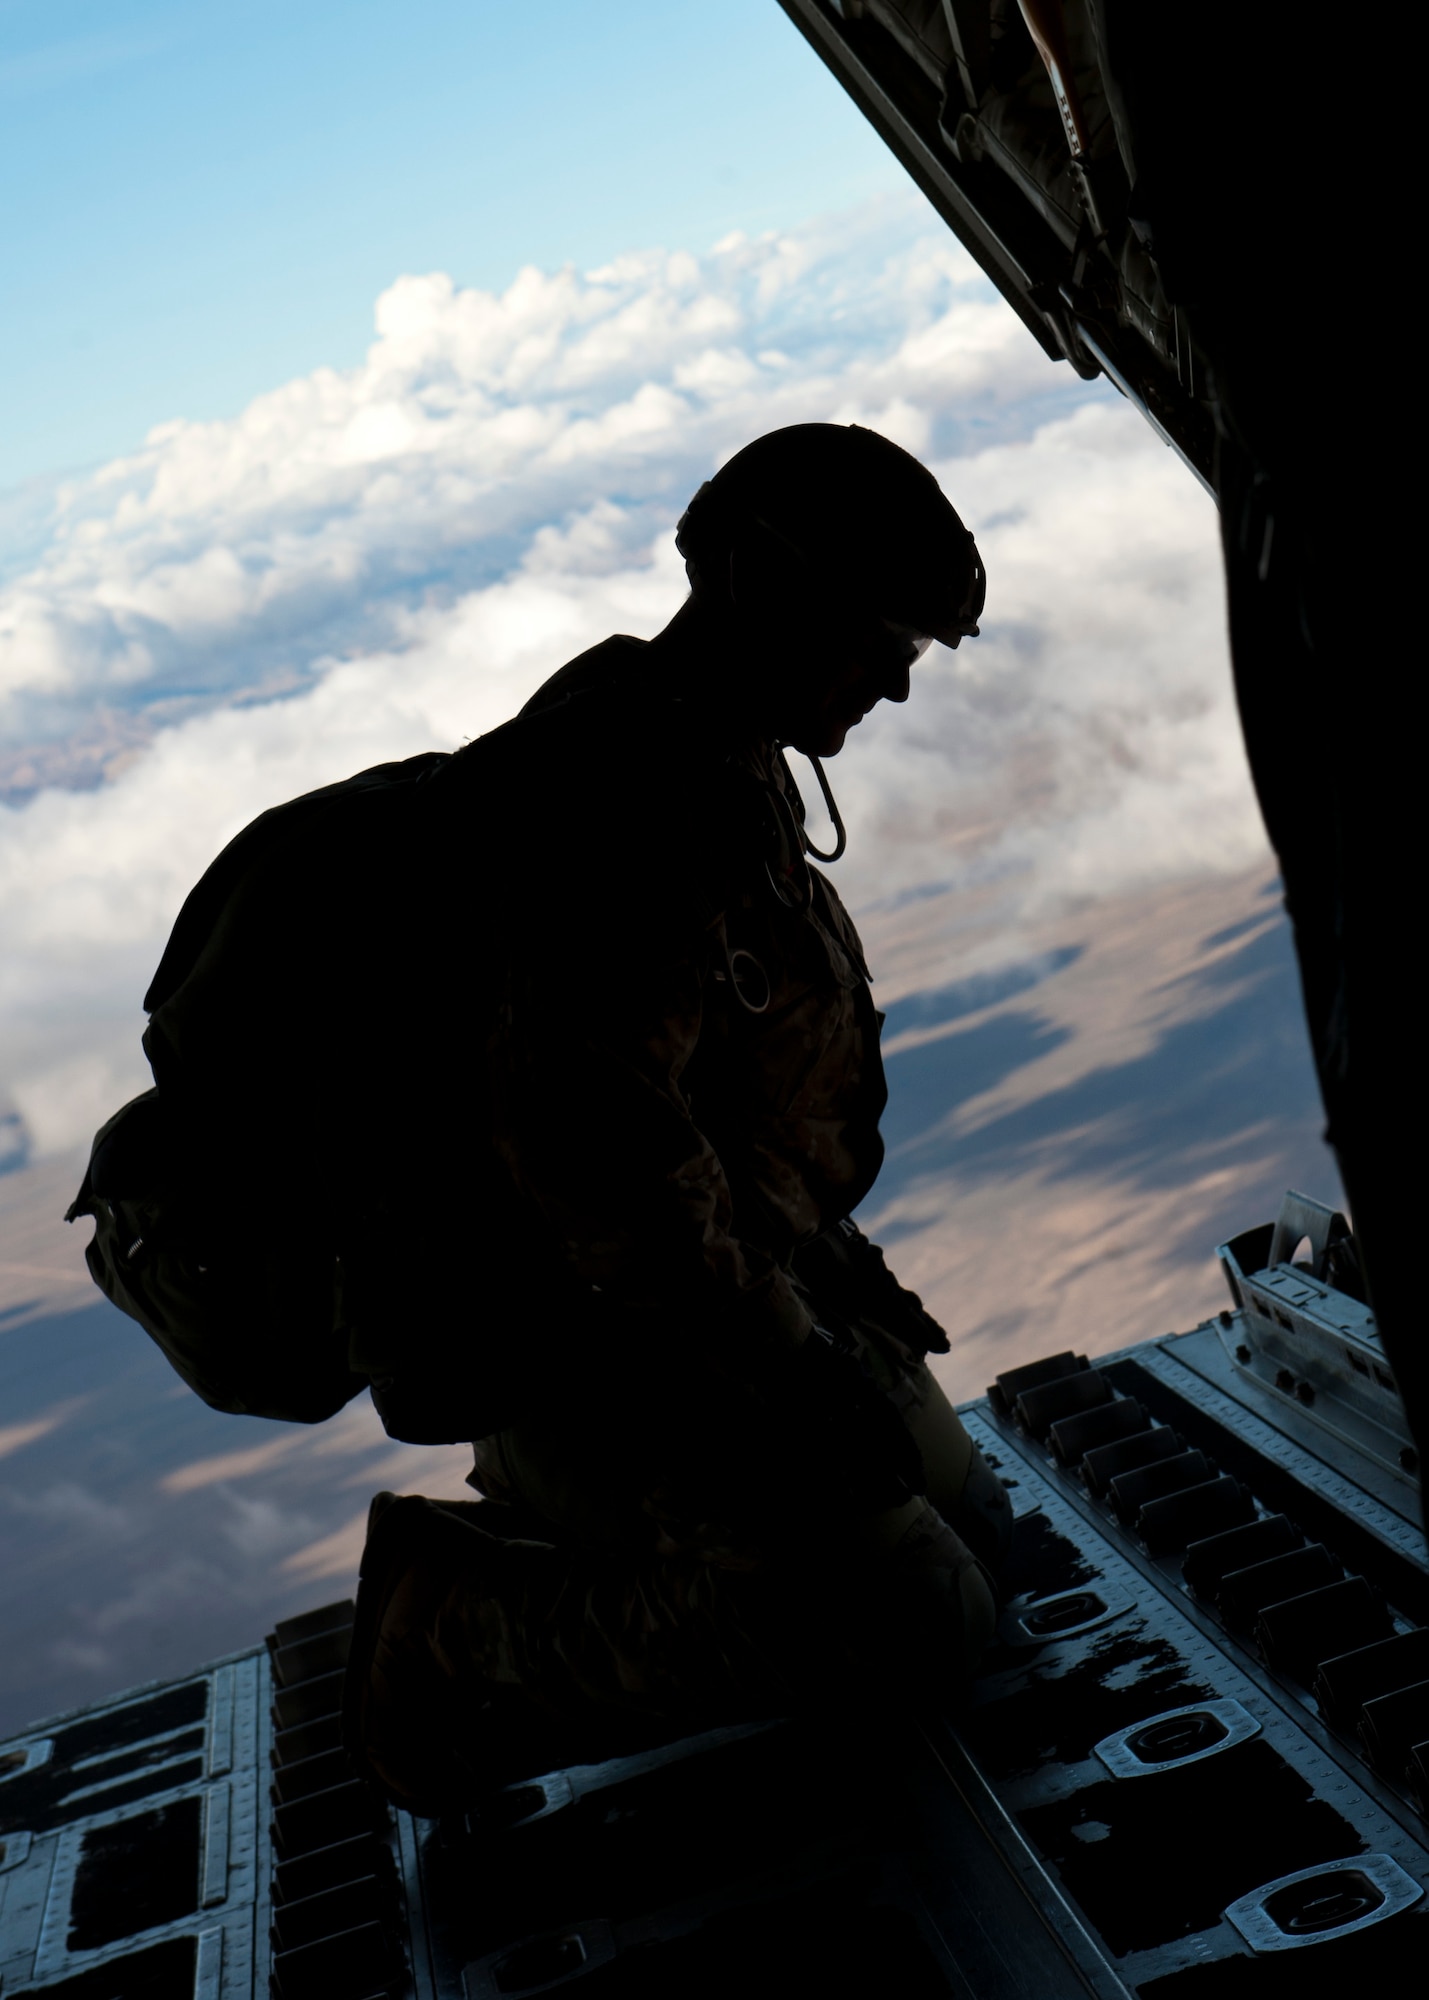 A U.S. Army Long Range Surveillance Paratrooper prepares to make a High Altitude Low Opening jump from a C-130J Hercules during the U.S. Air Force Weapons School's Joint Forcible Entry Exercise 14B over the Nevada Test and Training Range Dec. 4, 2014. JFEX is the weapons school’s large-scale air mobility exercise in which participants plan and execute a complex air-land operation in a simulated contested battlefield. (U.S. Air Force photo by Senior Airman Thomas Spangler)